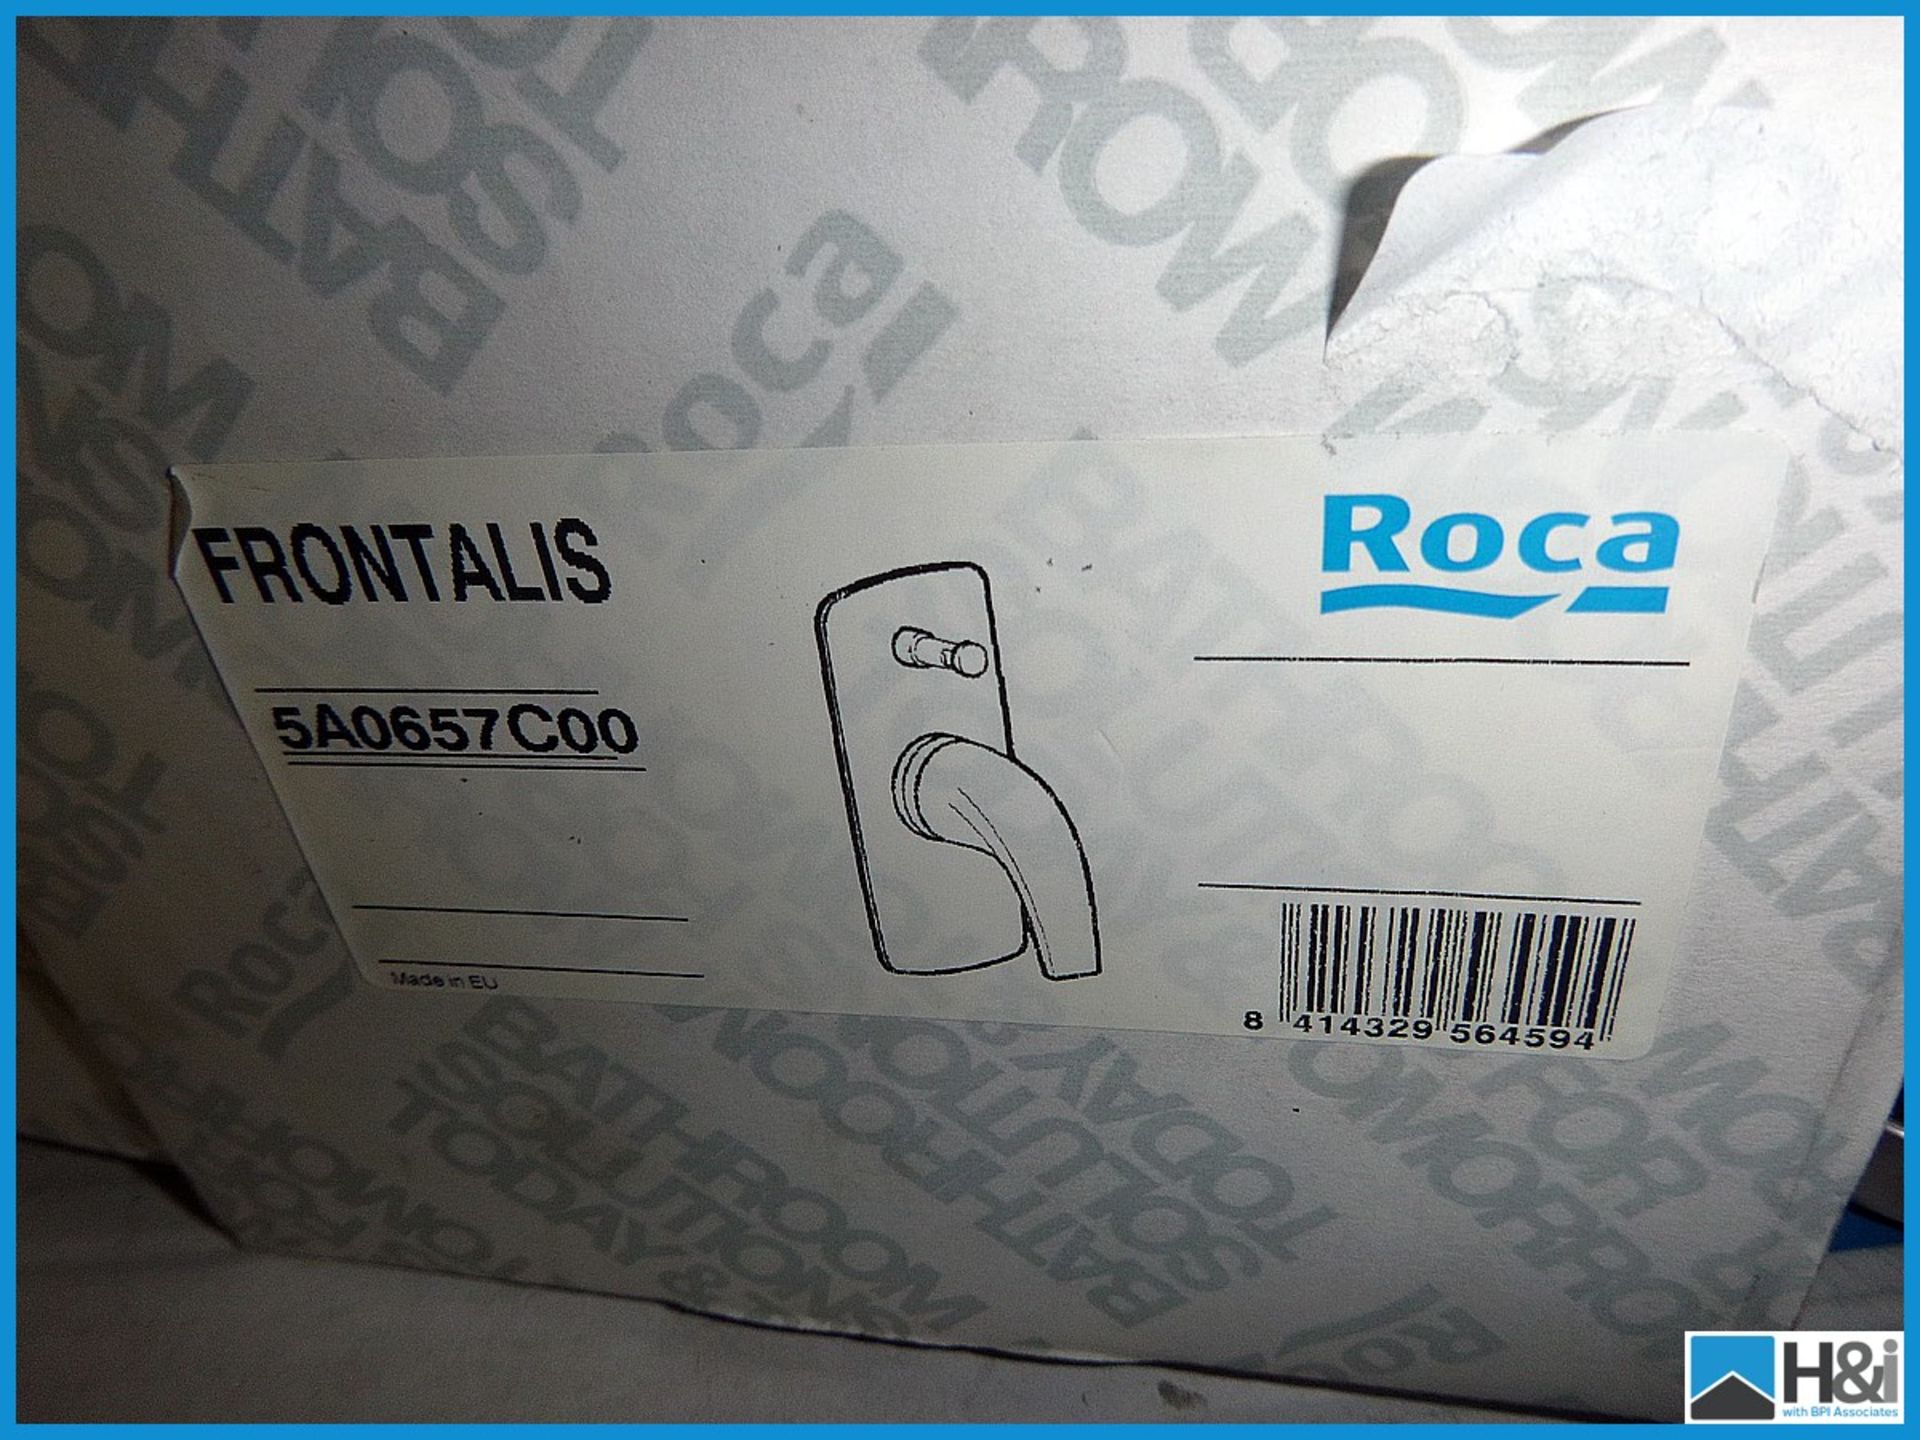 2 x Roca Short Filler Spout RRP £42 each £84 total  Appraisal: Viewing Essential Serial No: NA - Image 2 of 3